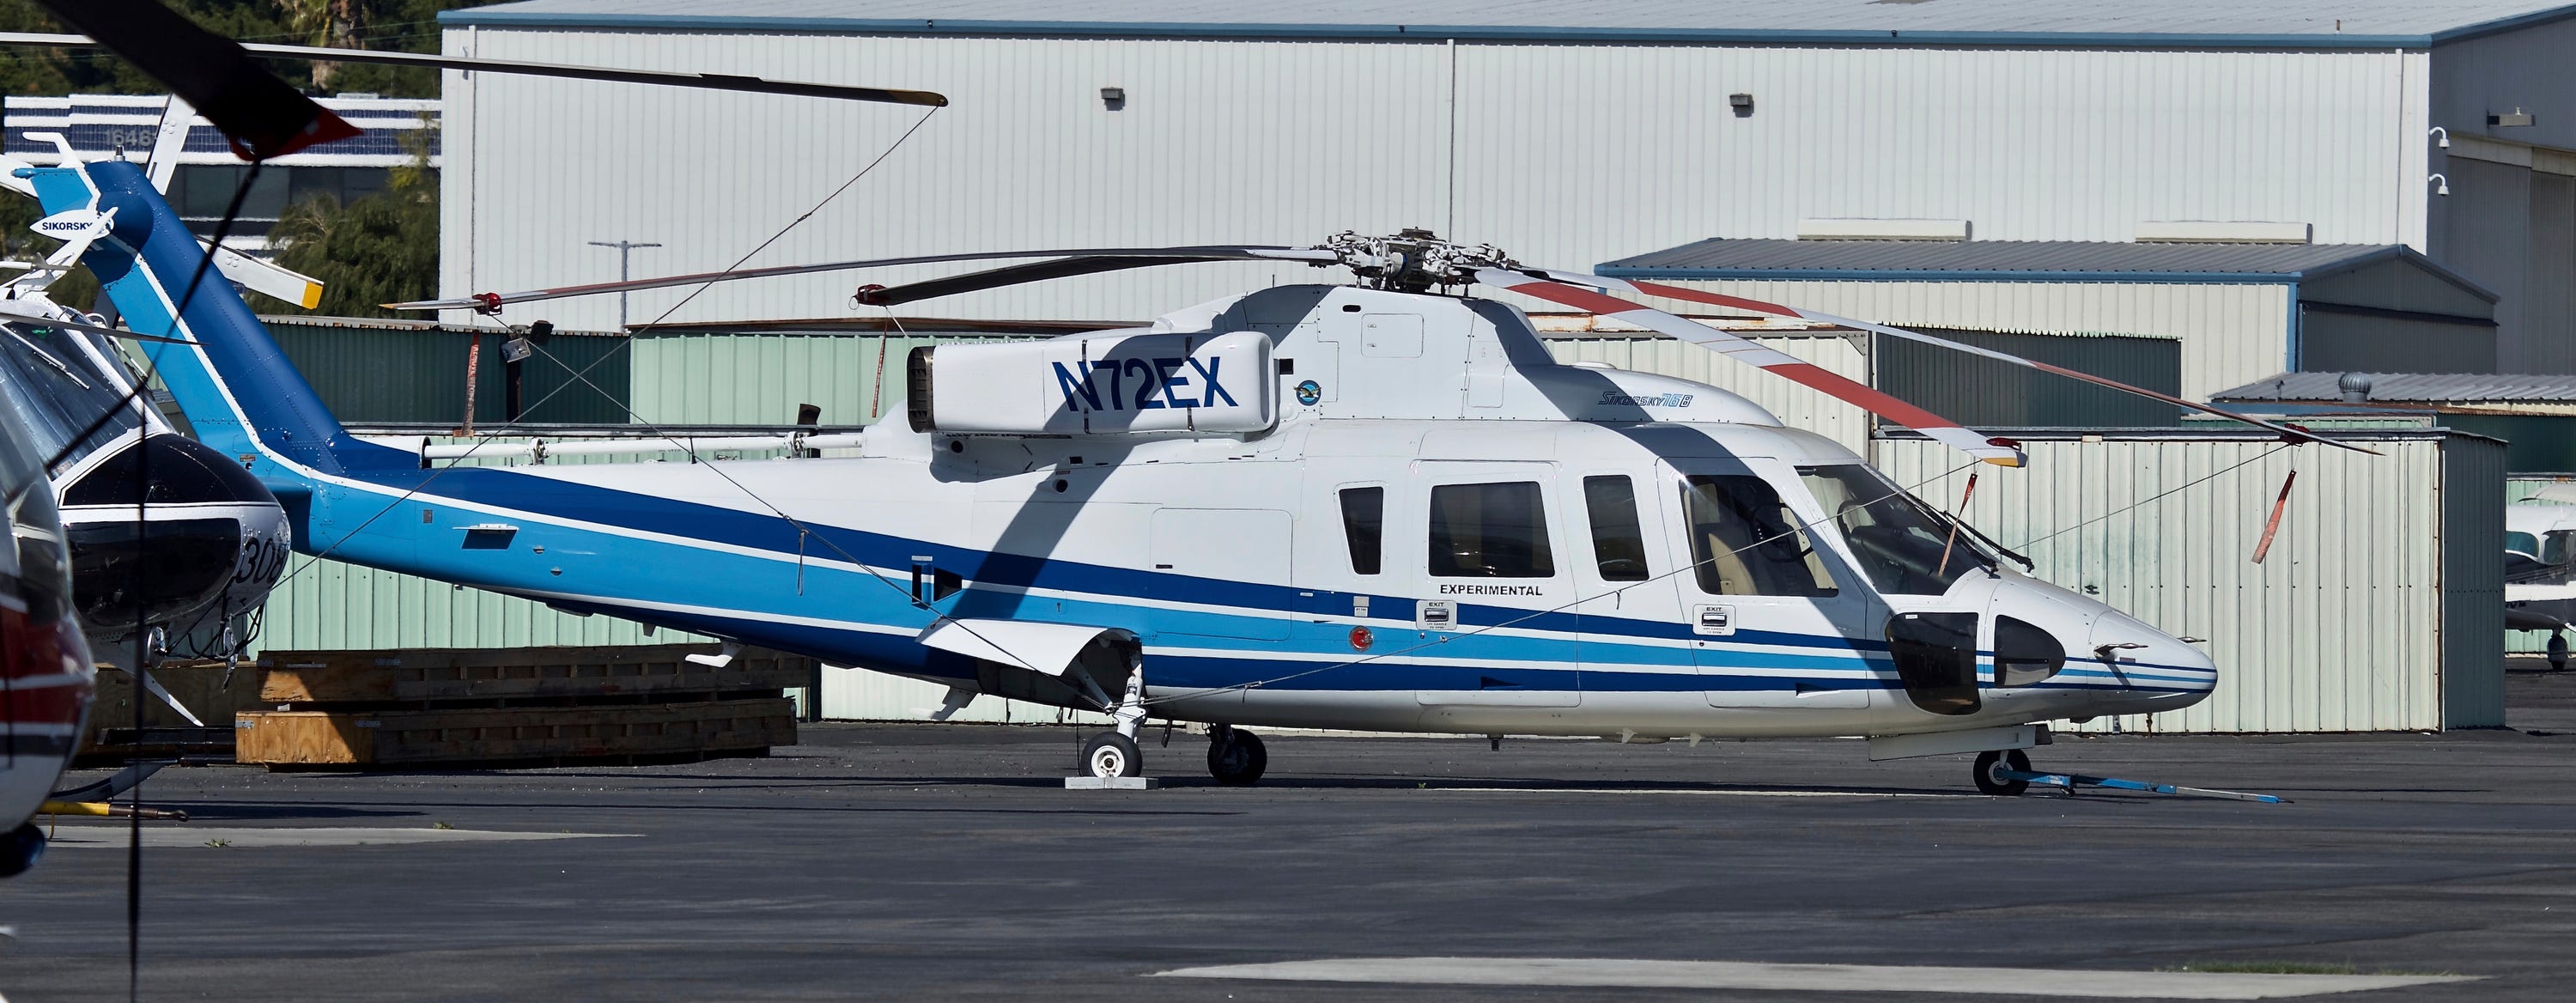 A Sikorsky S-76B helicopter is shown, the same model that crashed Jan. 26, 2020, killing Kobe Bryant and other others.